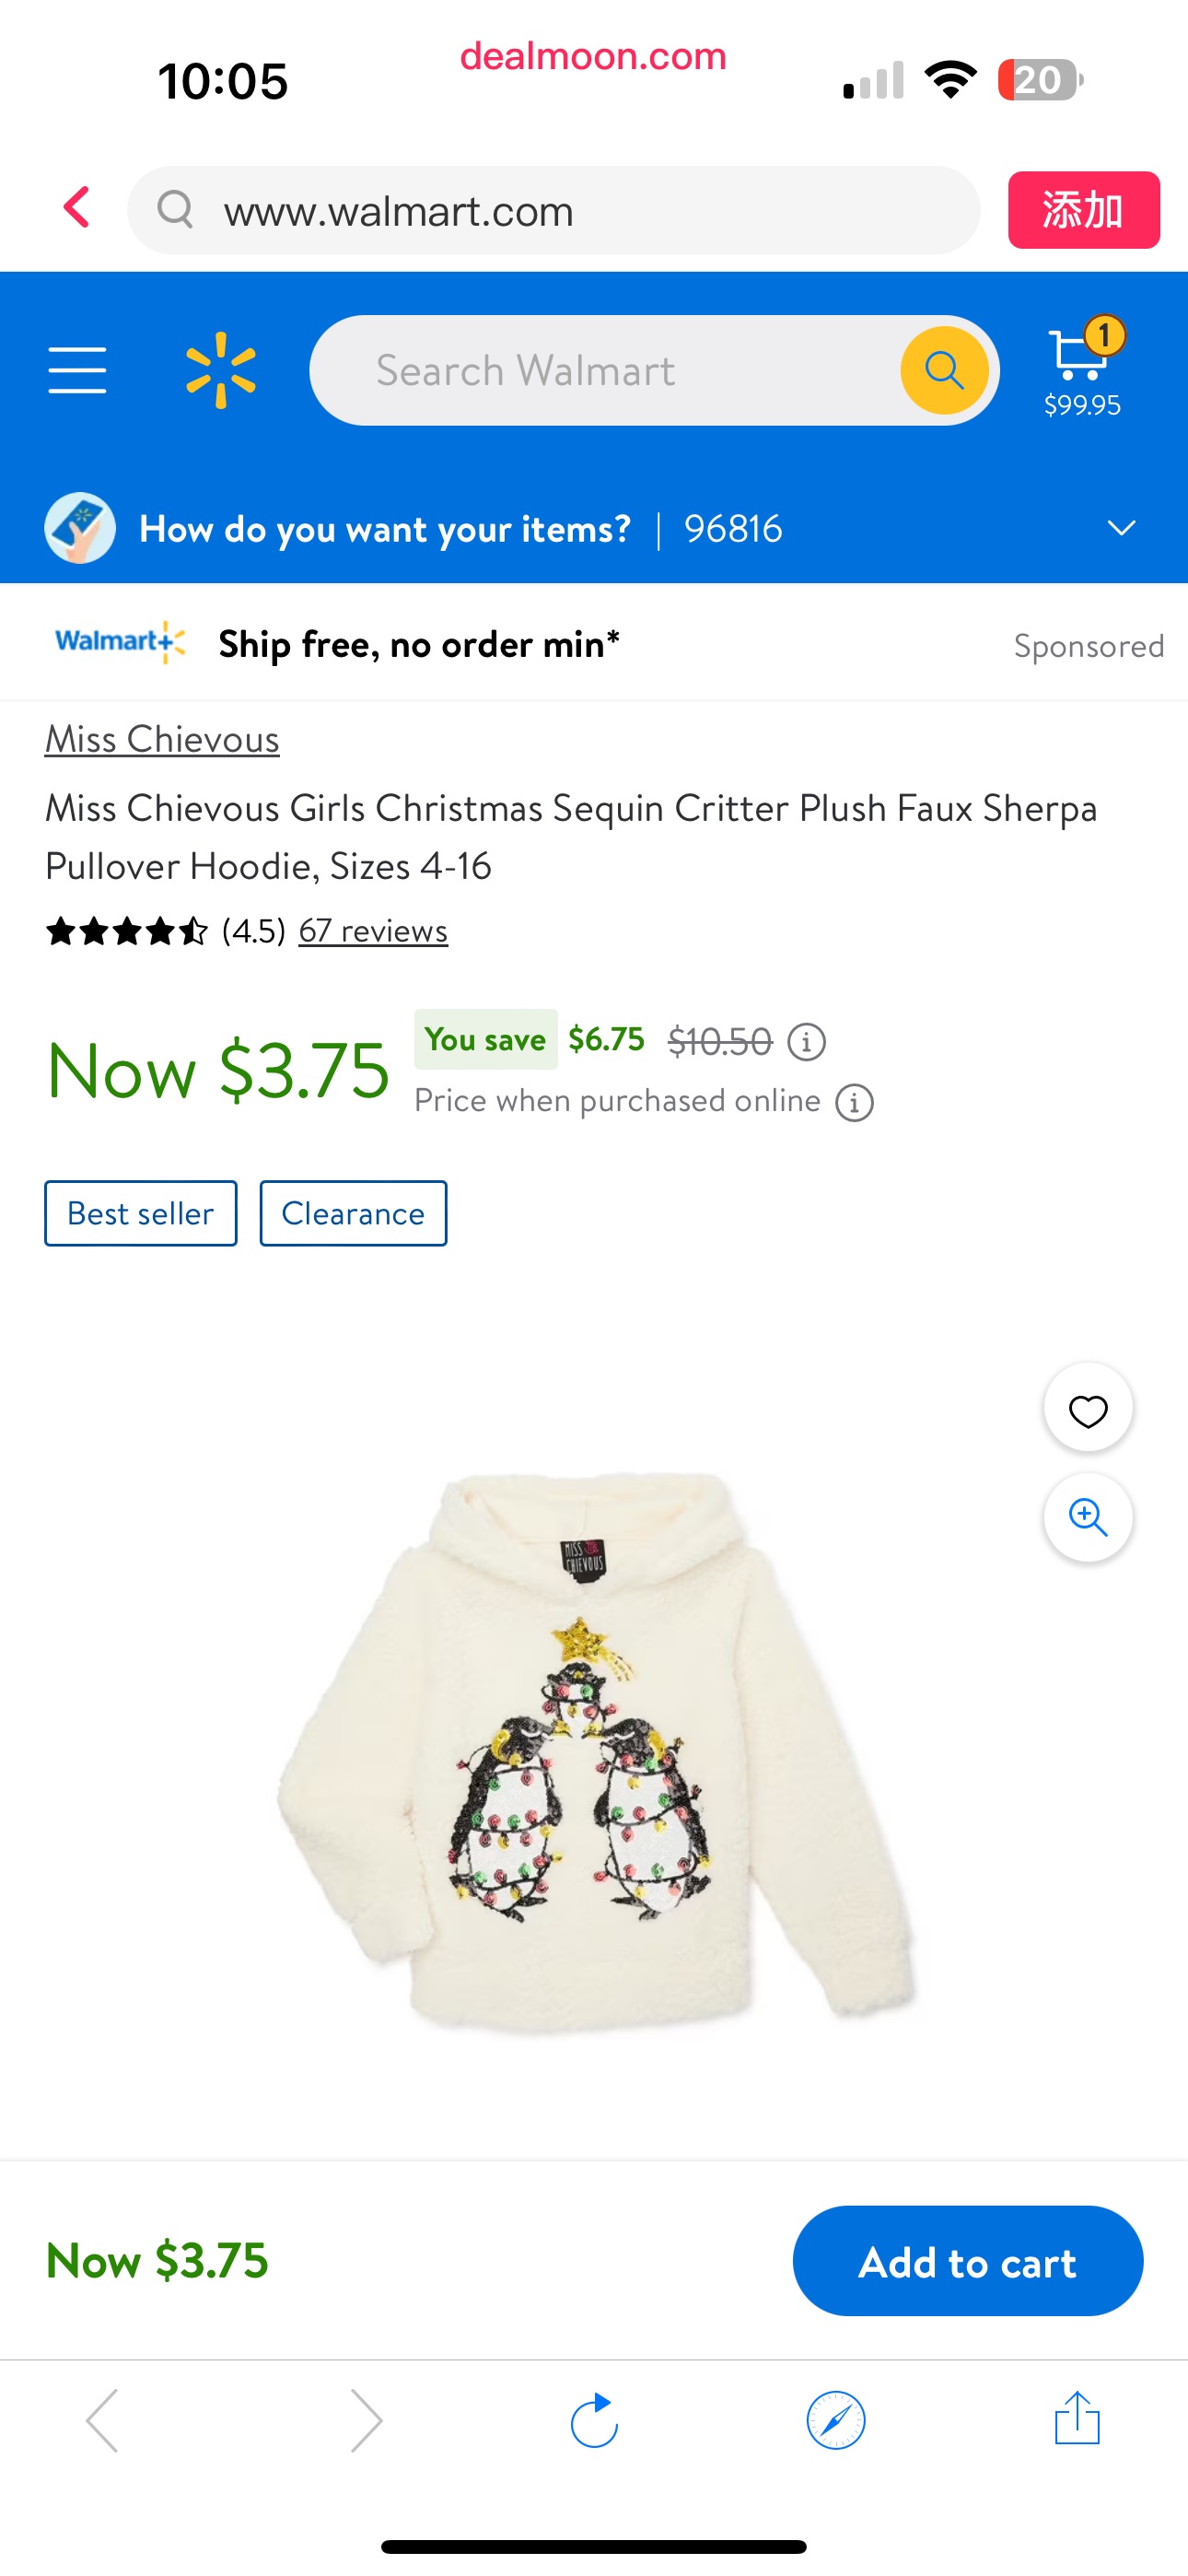 Miss Chievous Girls Christmas Sequin Critter Plush Faux Sherpa Pullover Hoodie, Sizes 4-16 - Walmart.com女童卫衣